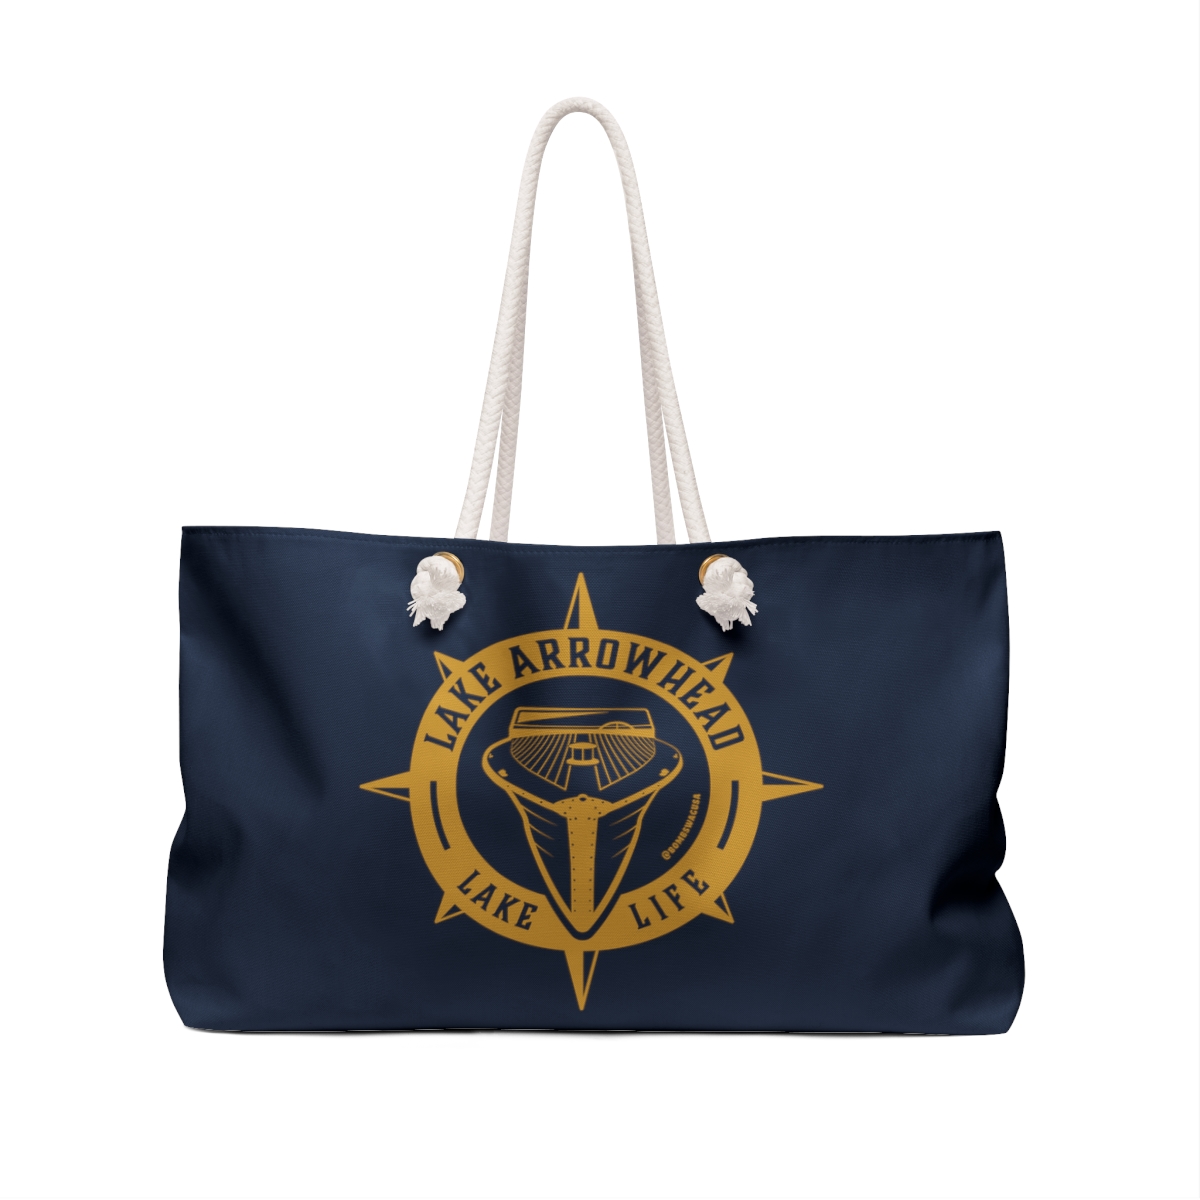 weekender bag with our exclusive woody boat artwork in gold on navy blue